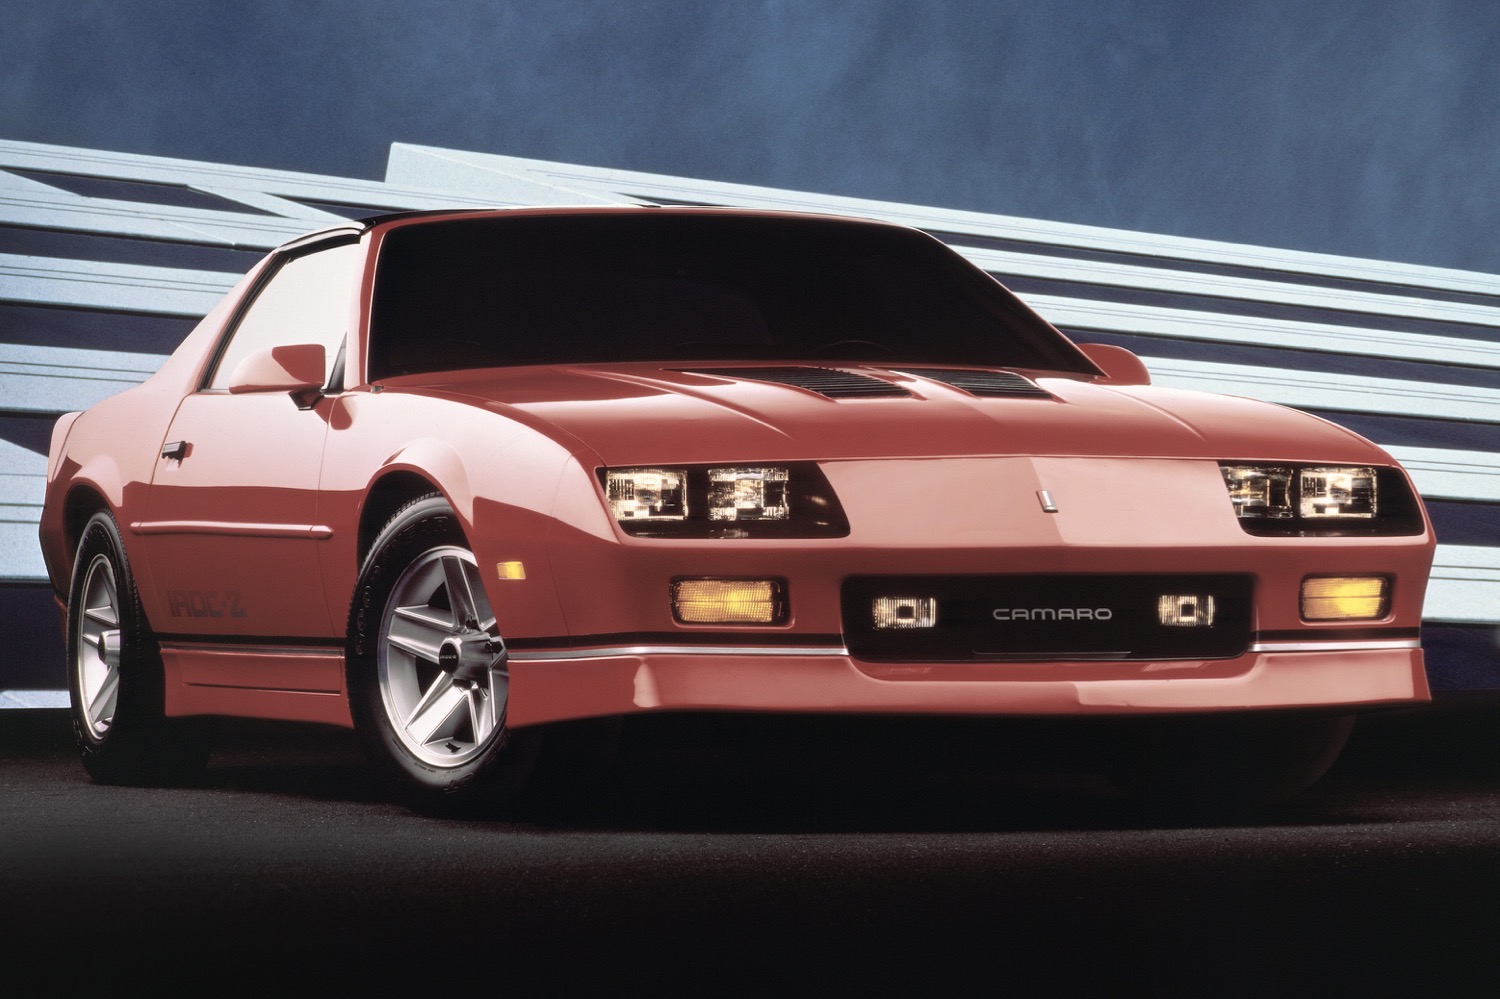 Chevrolet Camaro IROC-Z A Collectible, Says Bloomberg | Digital Trends